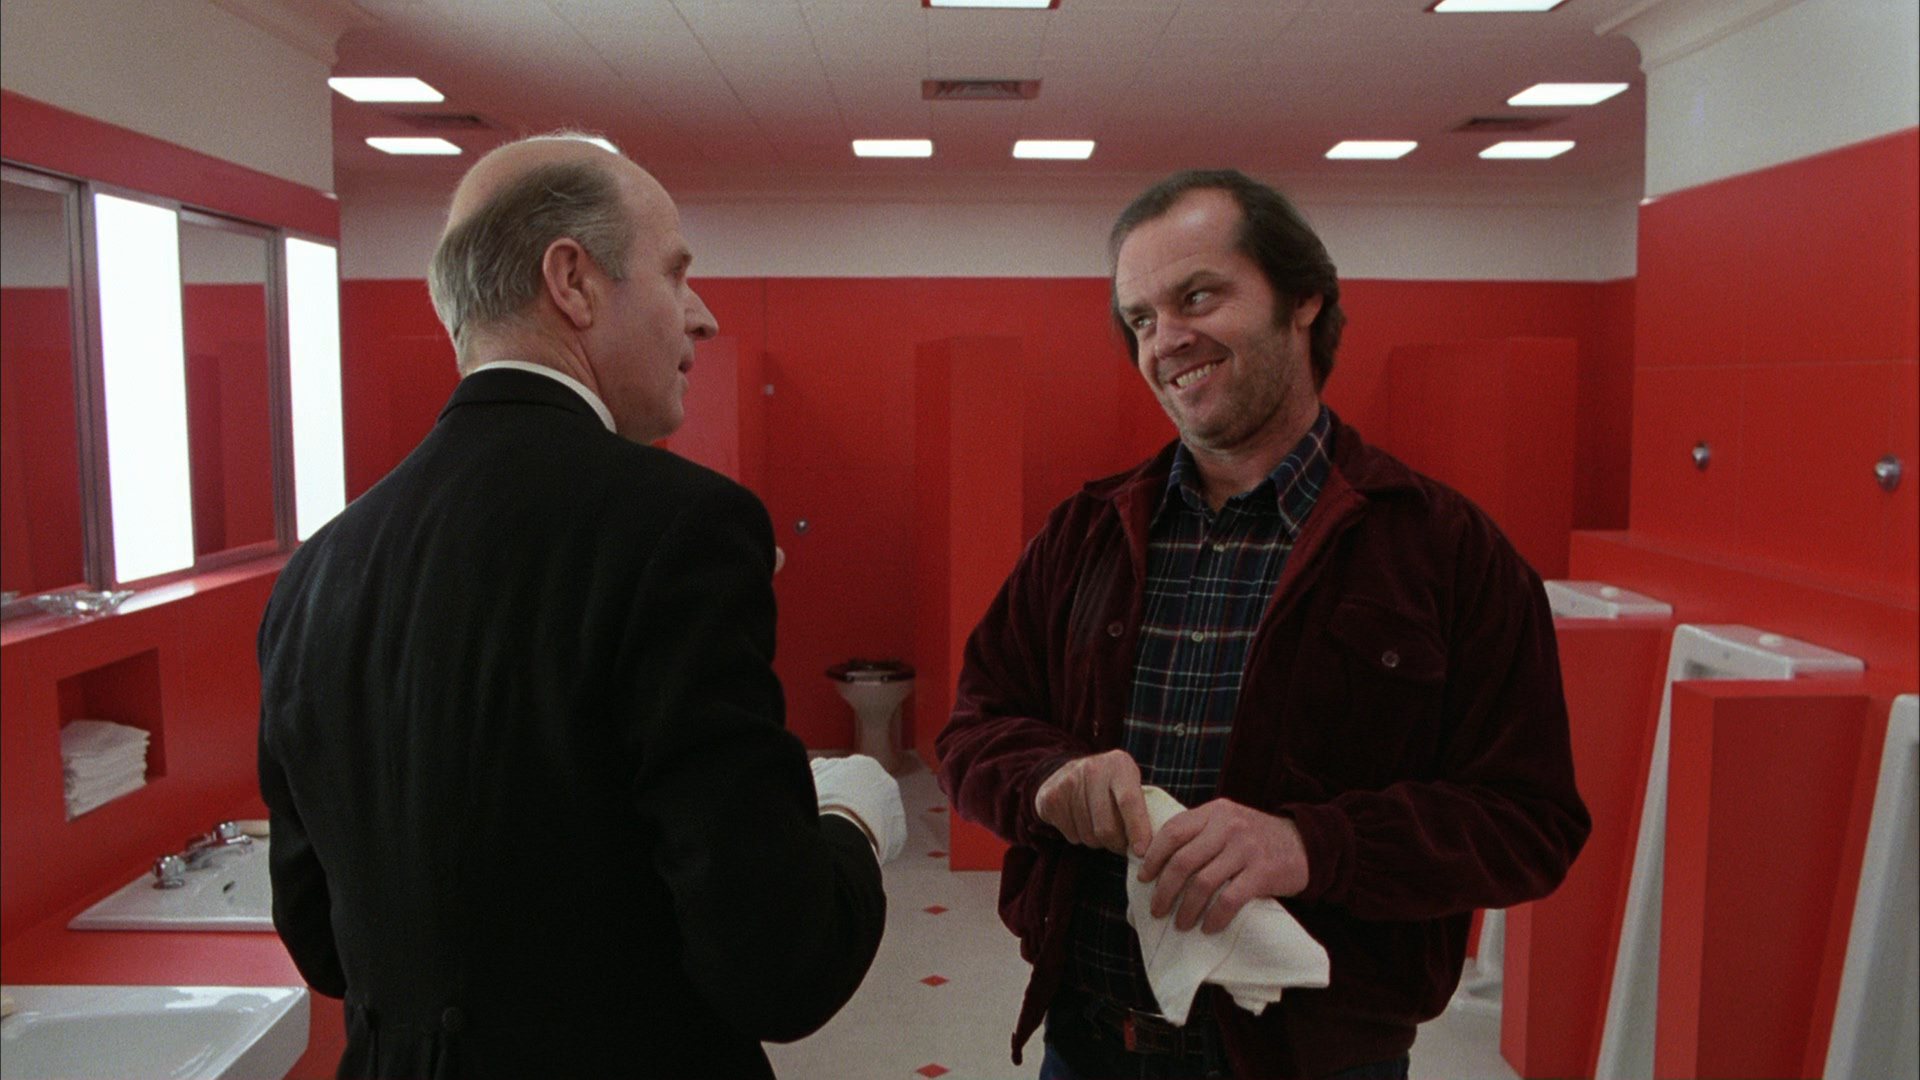 1920x1080 The Masterful Terror Of Stanley Kubrick's 'The Shining'